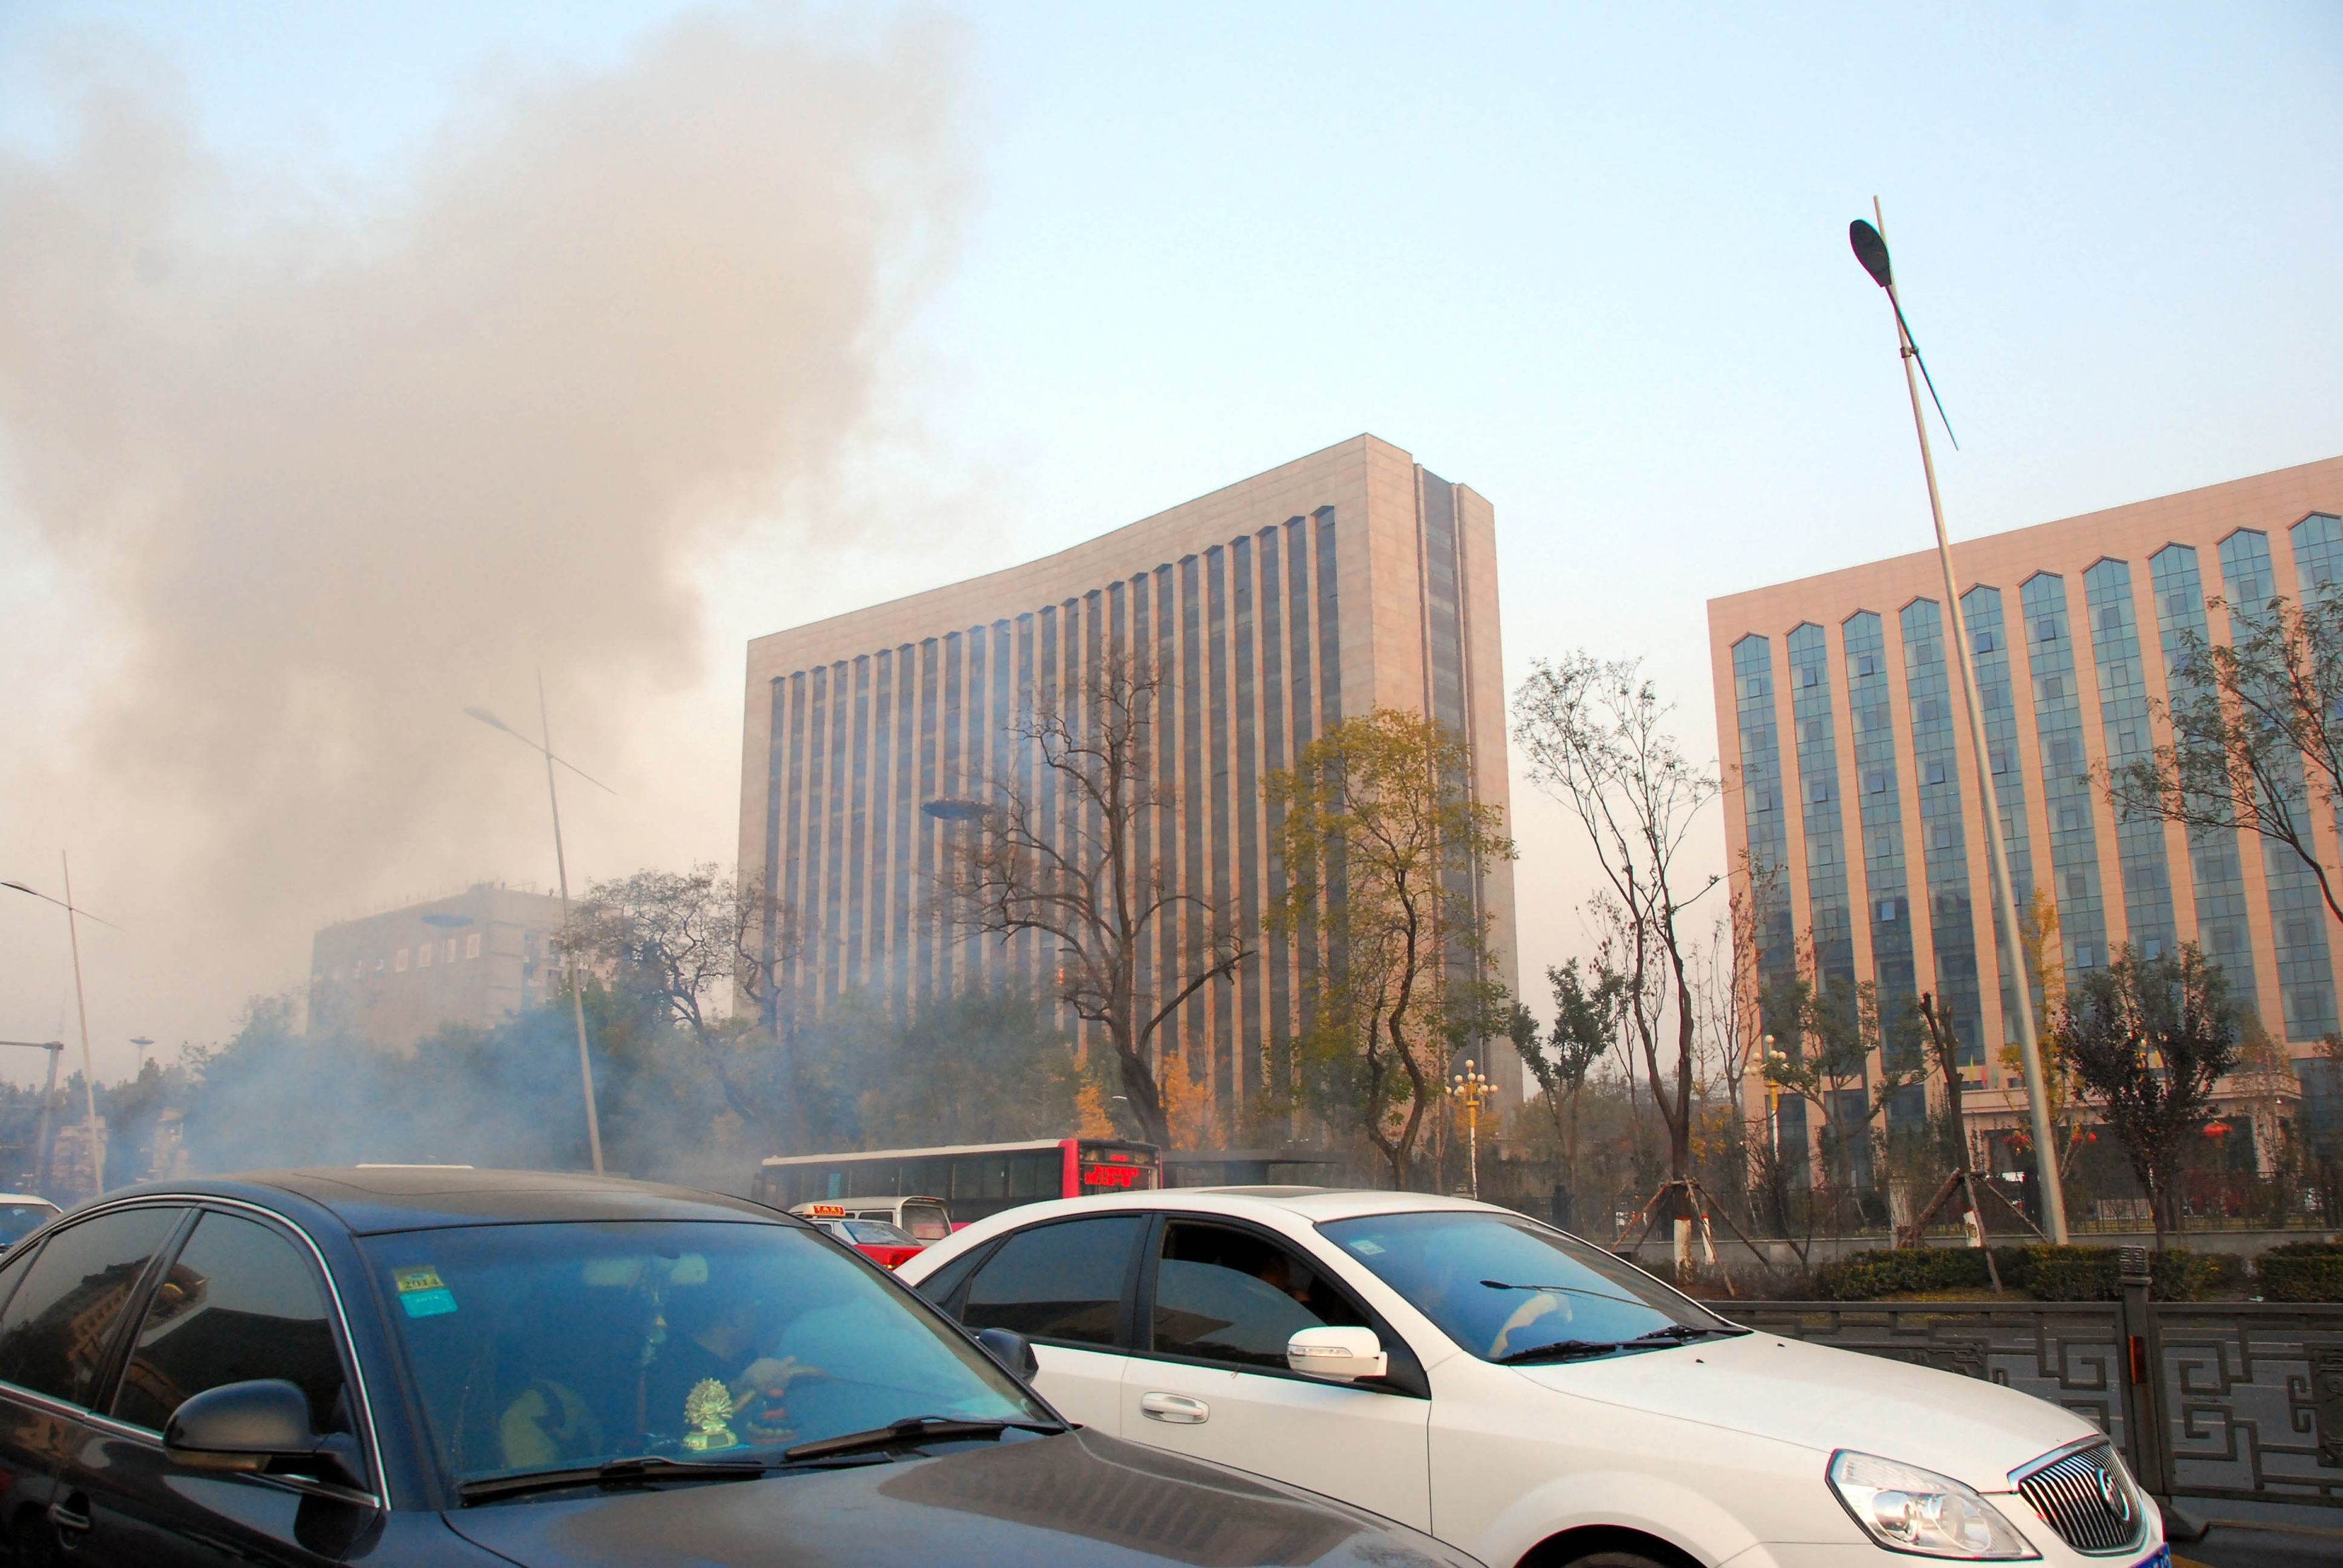 Explosions kill 1, injure 8 in north China city: reports